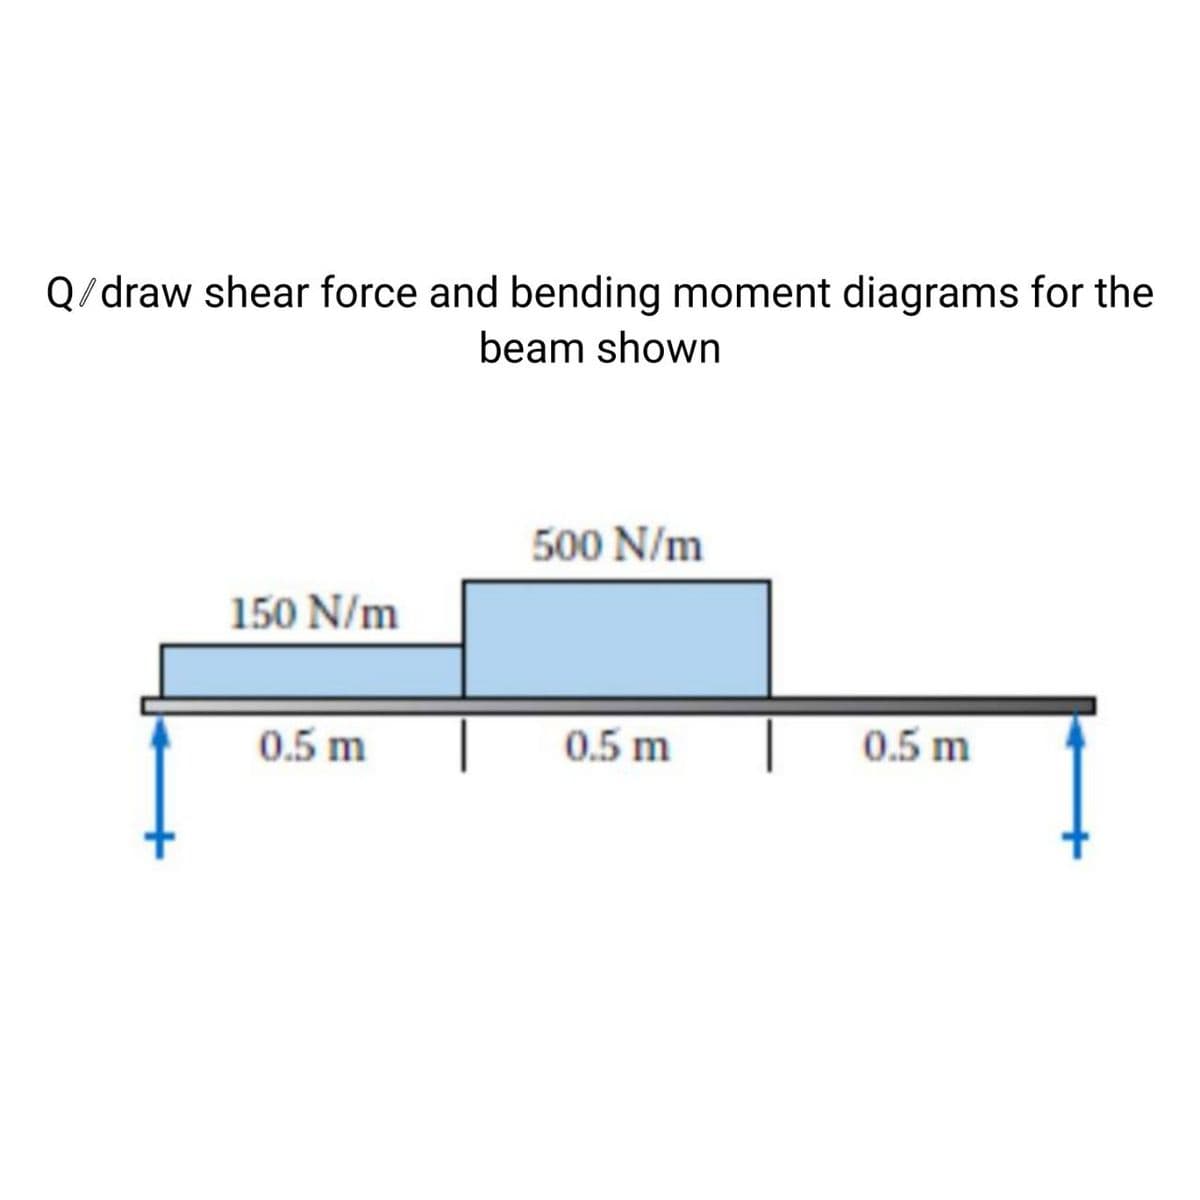 Q/draw shear force and bending moment diagrams for the
beam shown
500 N/m
150 N/m
0.5 m
0.5 m
0.5 m
